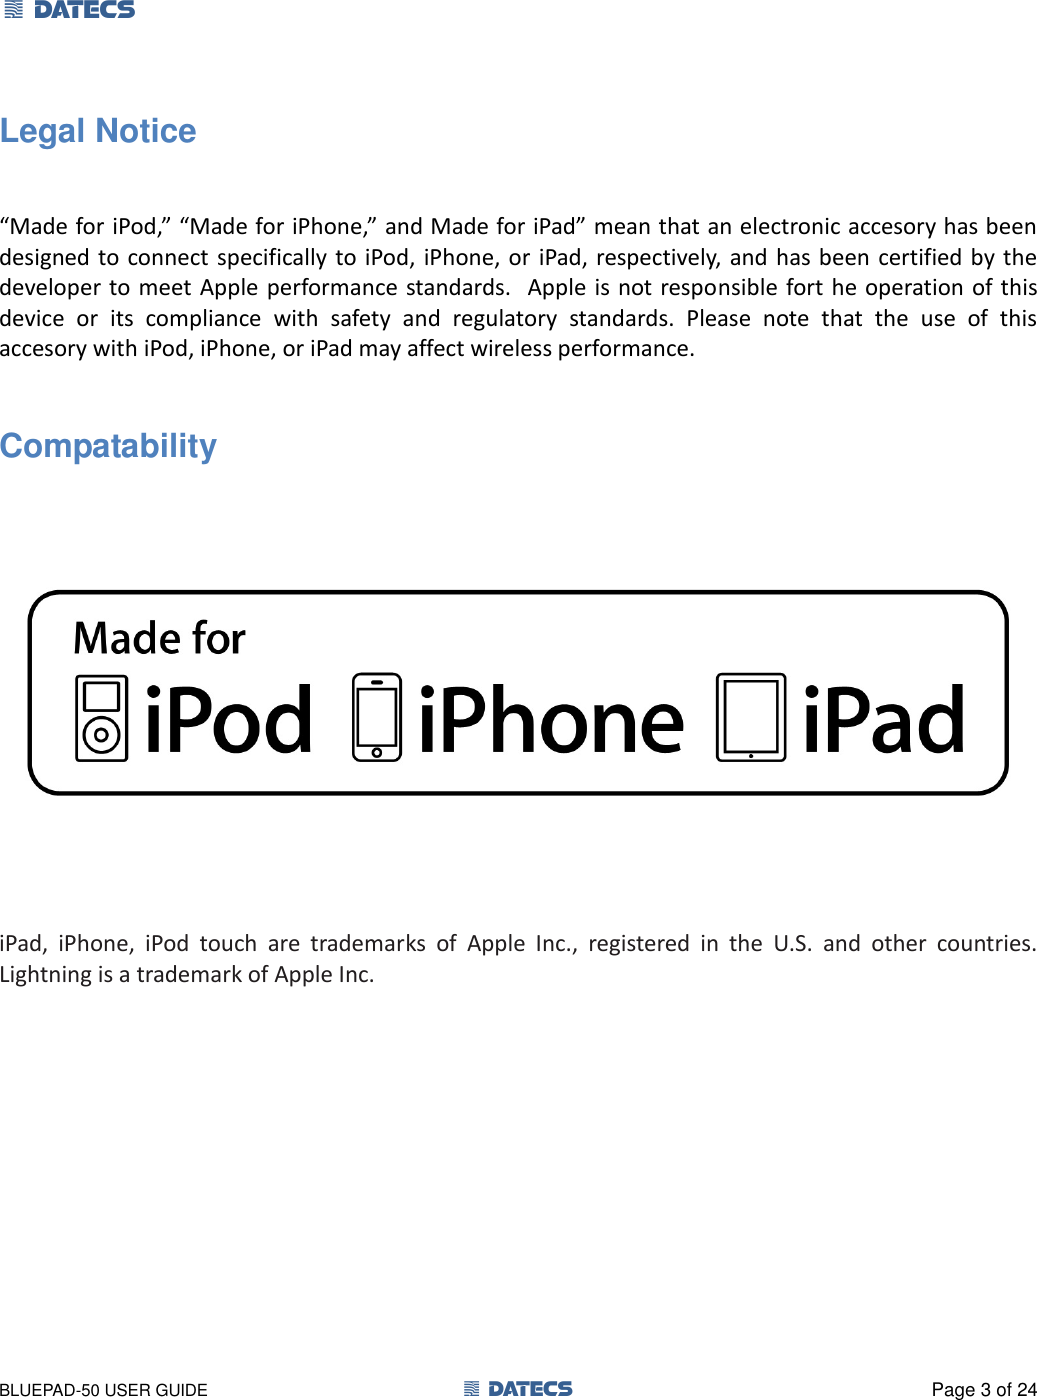 1 DATECS       BLUEPAD-50 USER GUIDE  1 DATECS  Page 3 of 24 Legal Notice   “Made for iPod,” “Made for iPhone,” and Made for iPad” mean that an electronic accesory has been designed to connect specifically to  iPod,  iPhone, or iPad, respectively, and has been  certified by the developer to meet Apple performance standards.   Apple is not responsible fort he operation of this device  or  its  compliance  with  safety  and  regulatory  standards.  Please  note  that  the  use  of  this accesory with iPod, iPhone, or iPad may affect wireless performance.  Compatability      iPad,  iPhone,  iPod  touch  are  trademarks  of  Apple  Inc.,  registered  in  the  U.S.  and  other  countries. Lightning is a trademark of Apple Inc. 